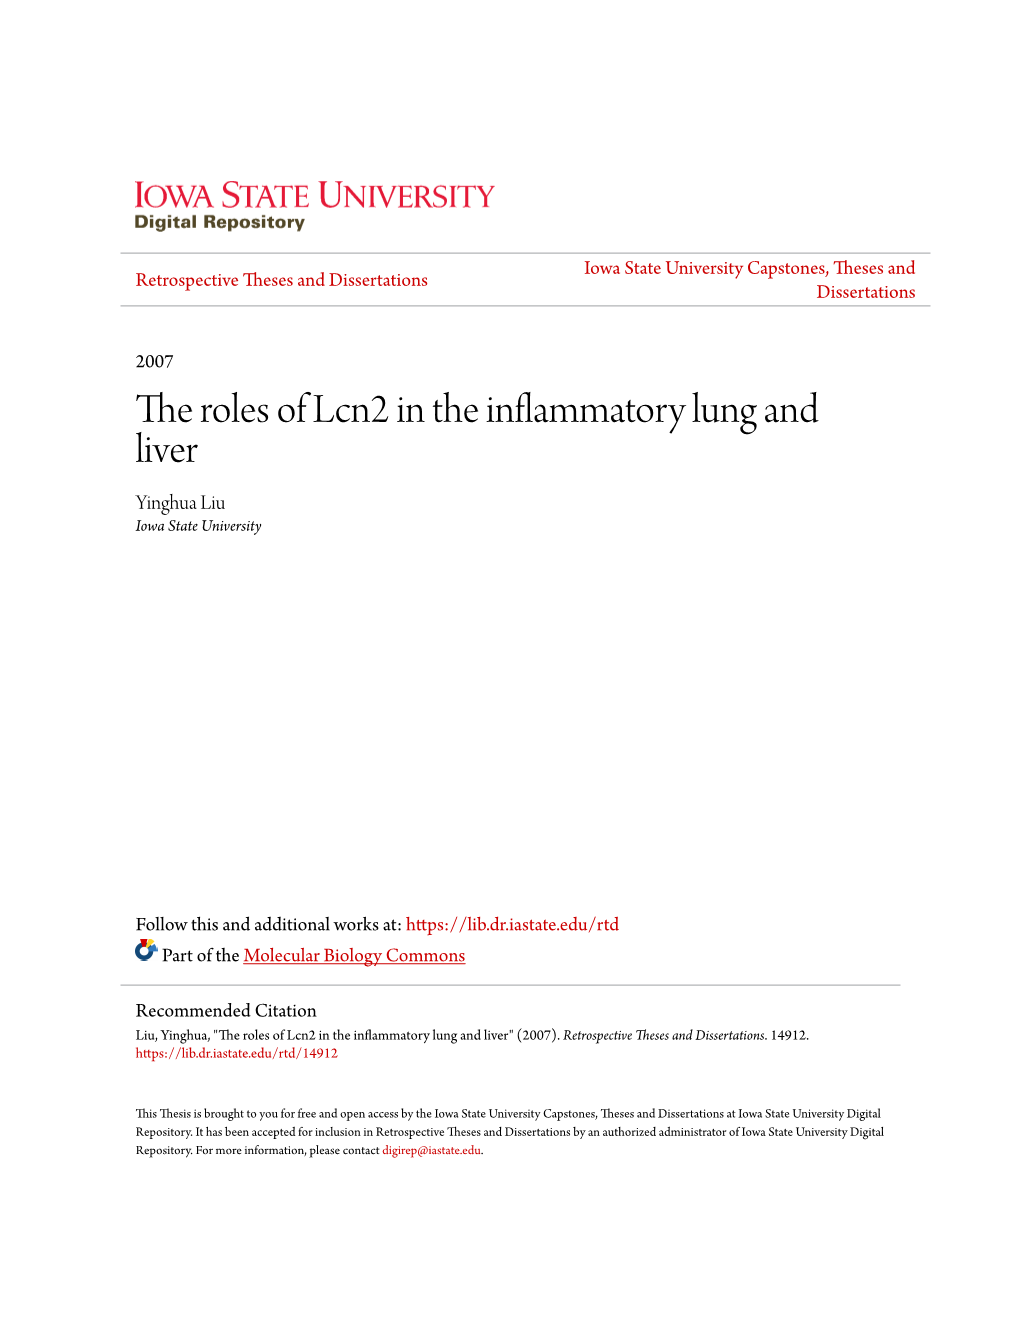 The Roles of Lcn2 in the Inflammatory Lung and Liver